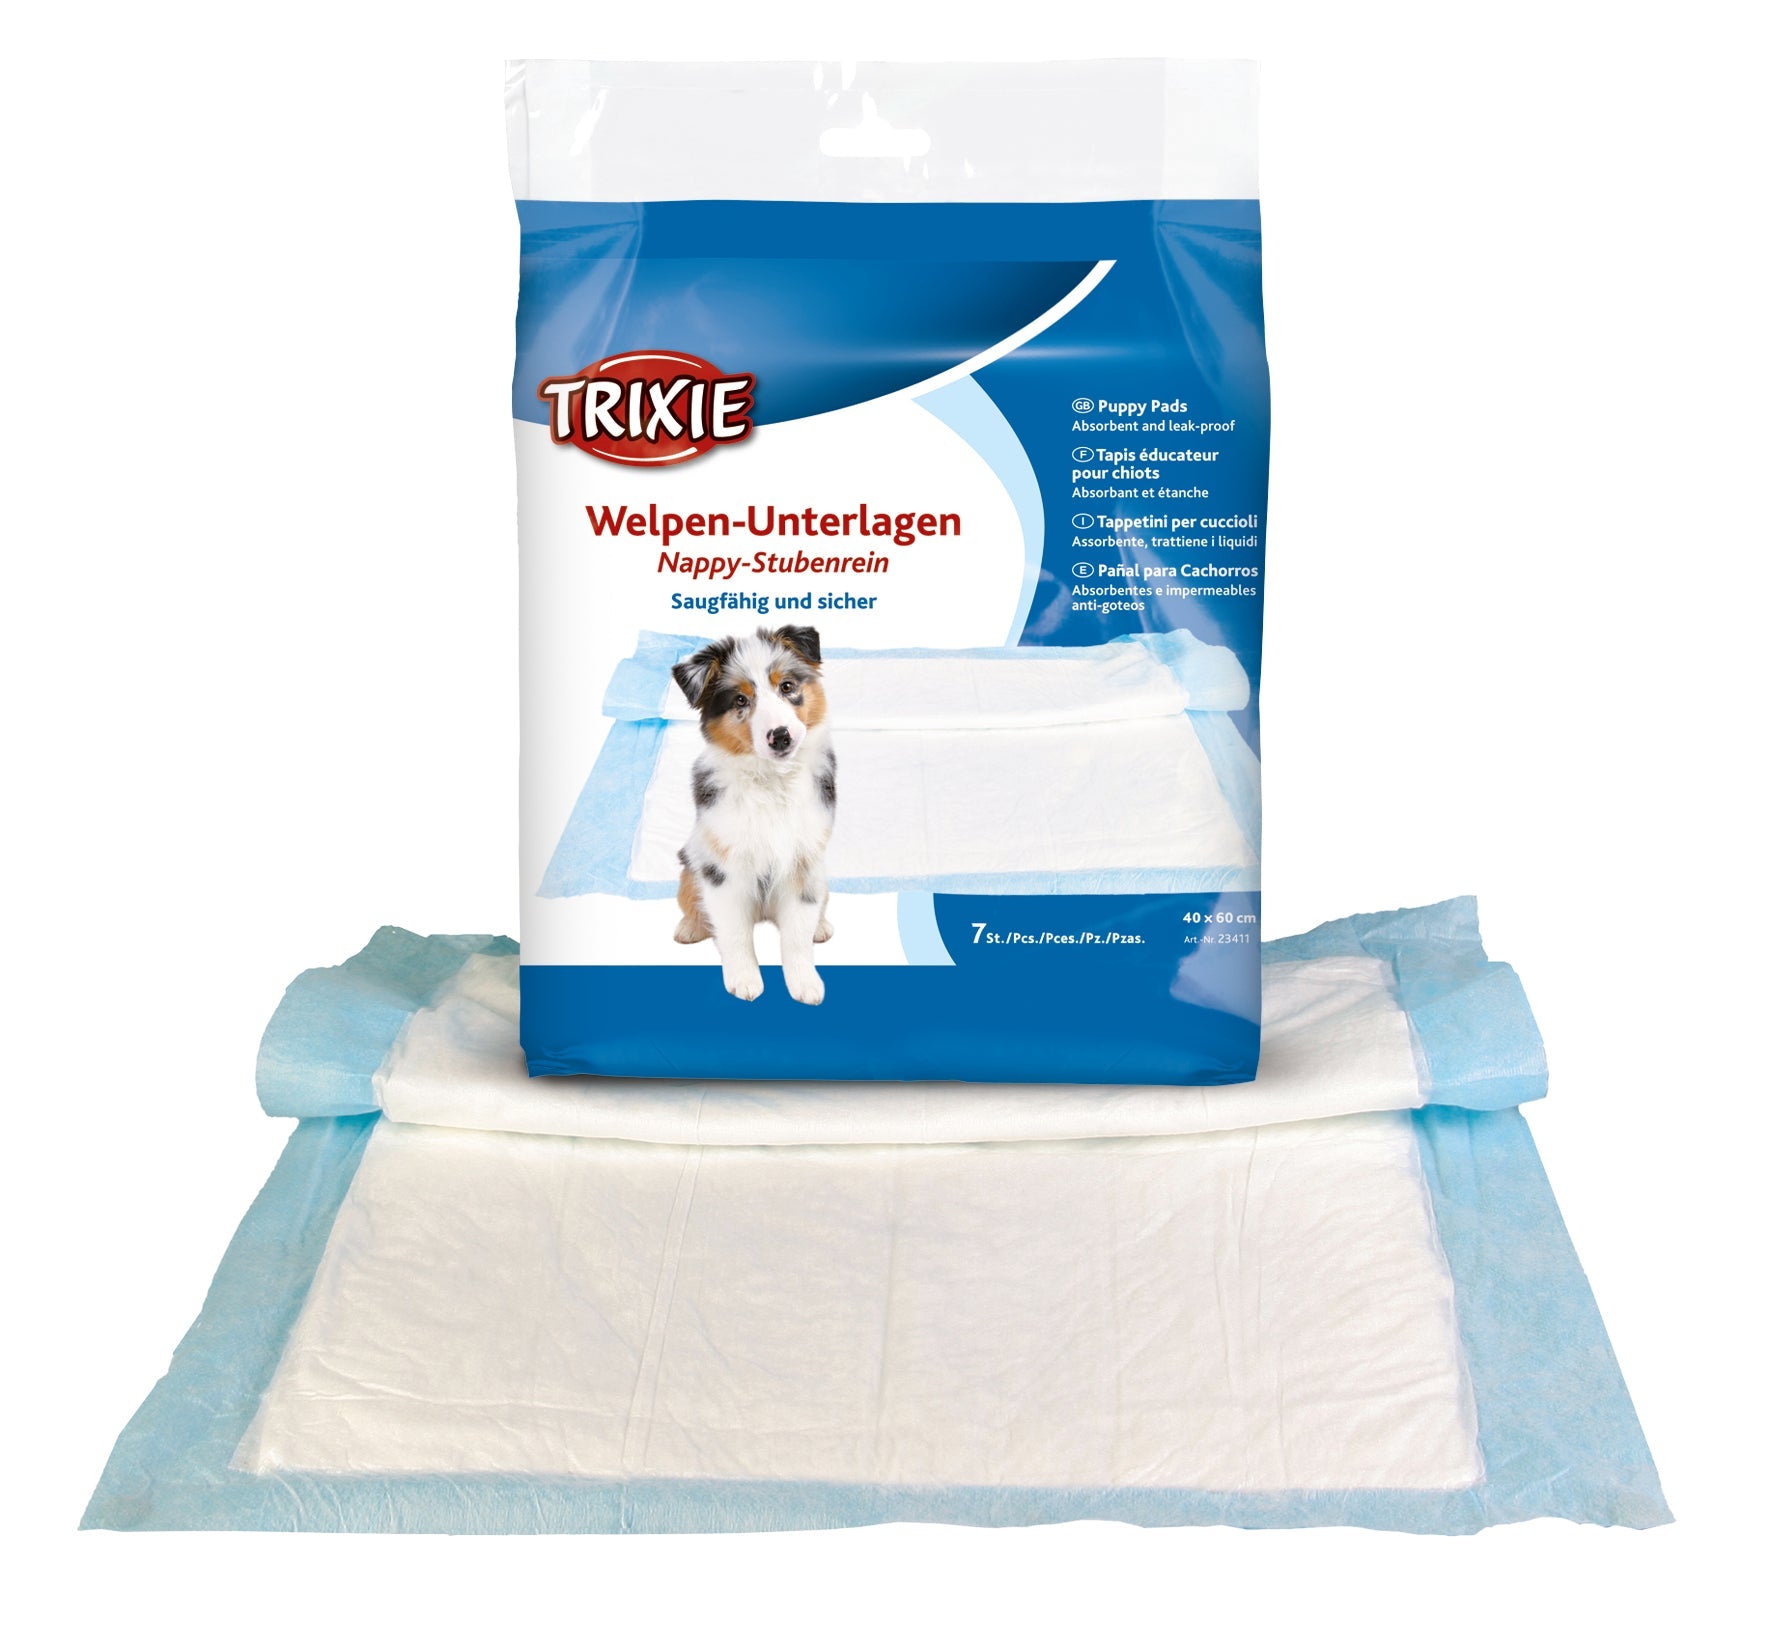 Trixie Nappy Puppy Pad 7 Pads Pack, 16 x 24 inches - Petsgool Online